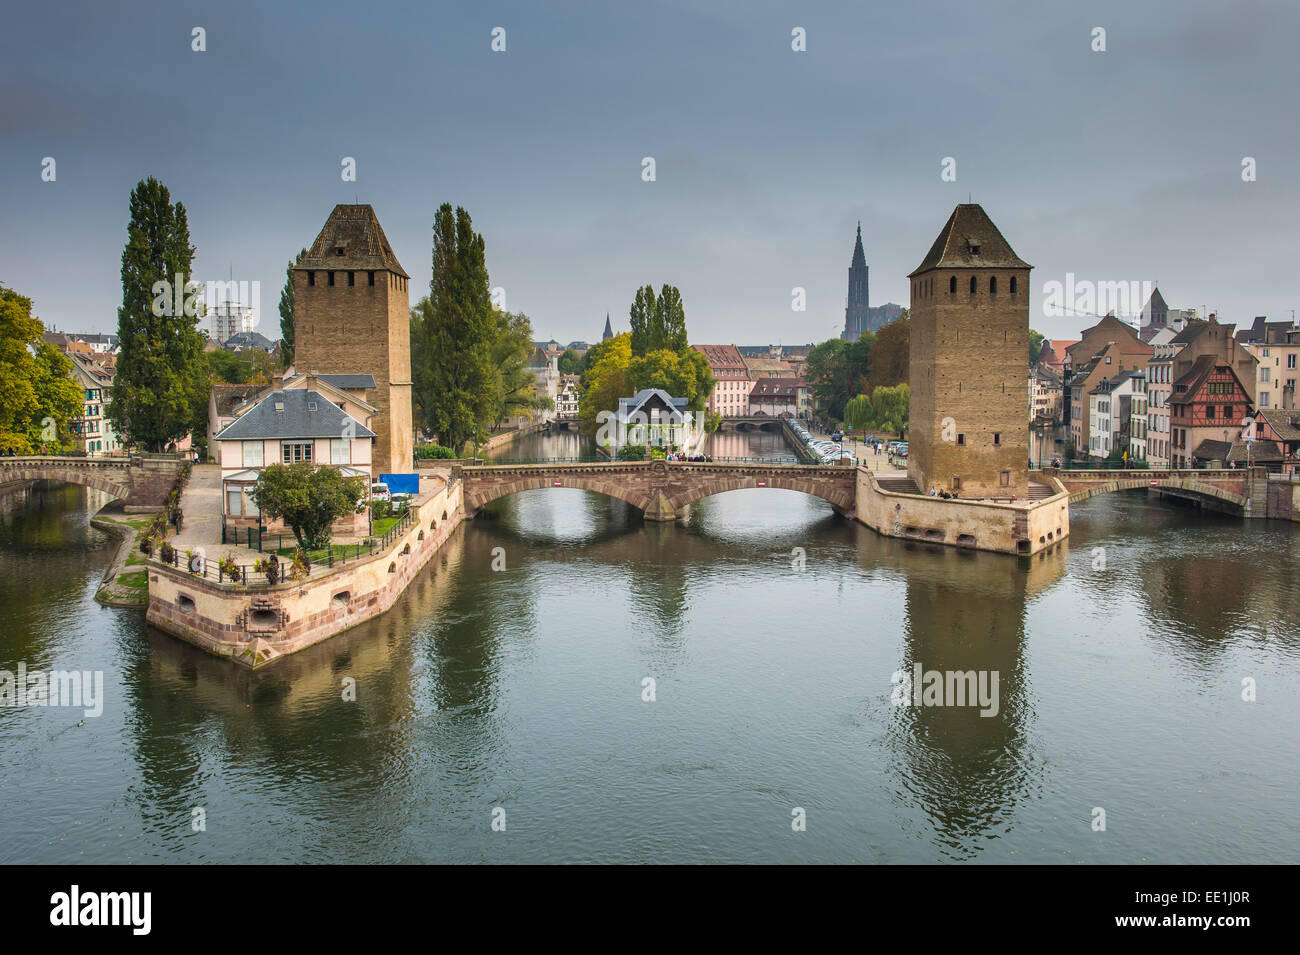 Ponts Couverts, UNESCO World Heritage Site, Ill, Strasbourg, Alsace, France, Europe Banque D'Images